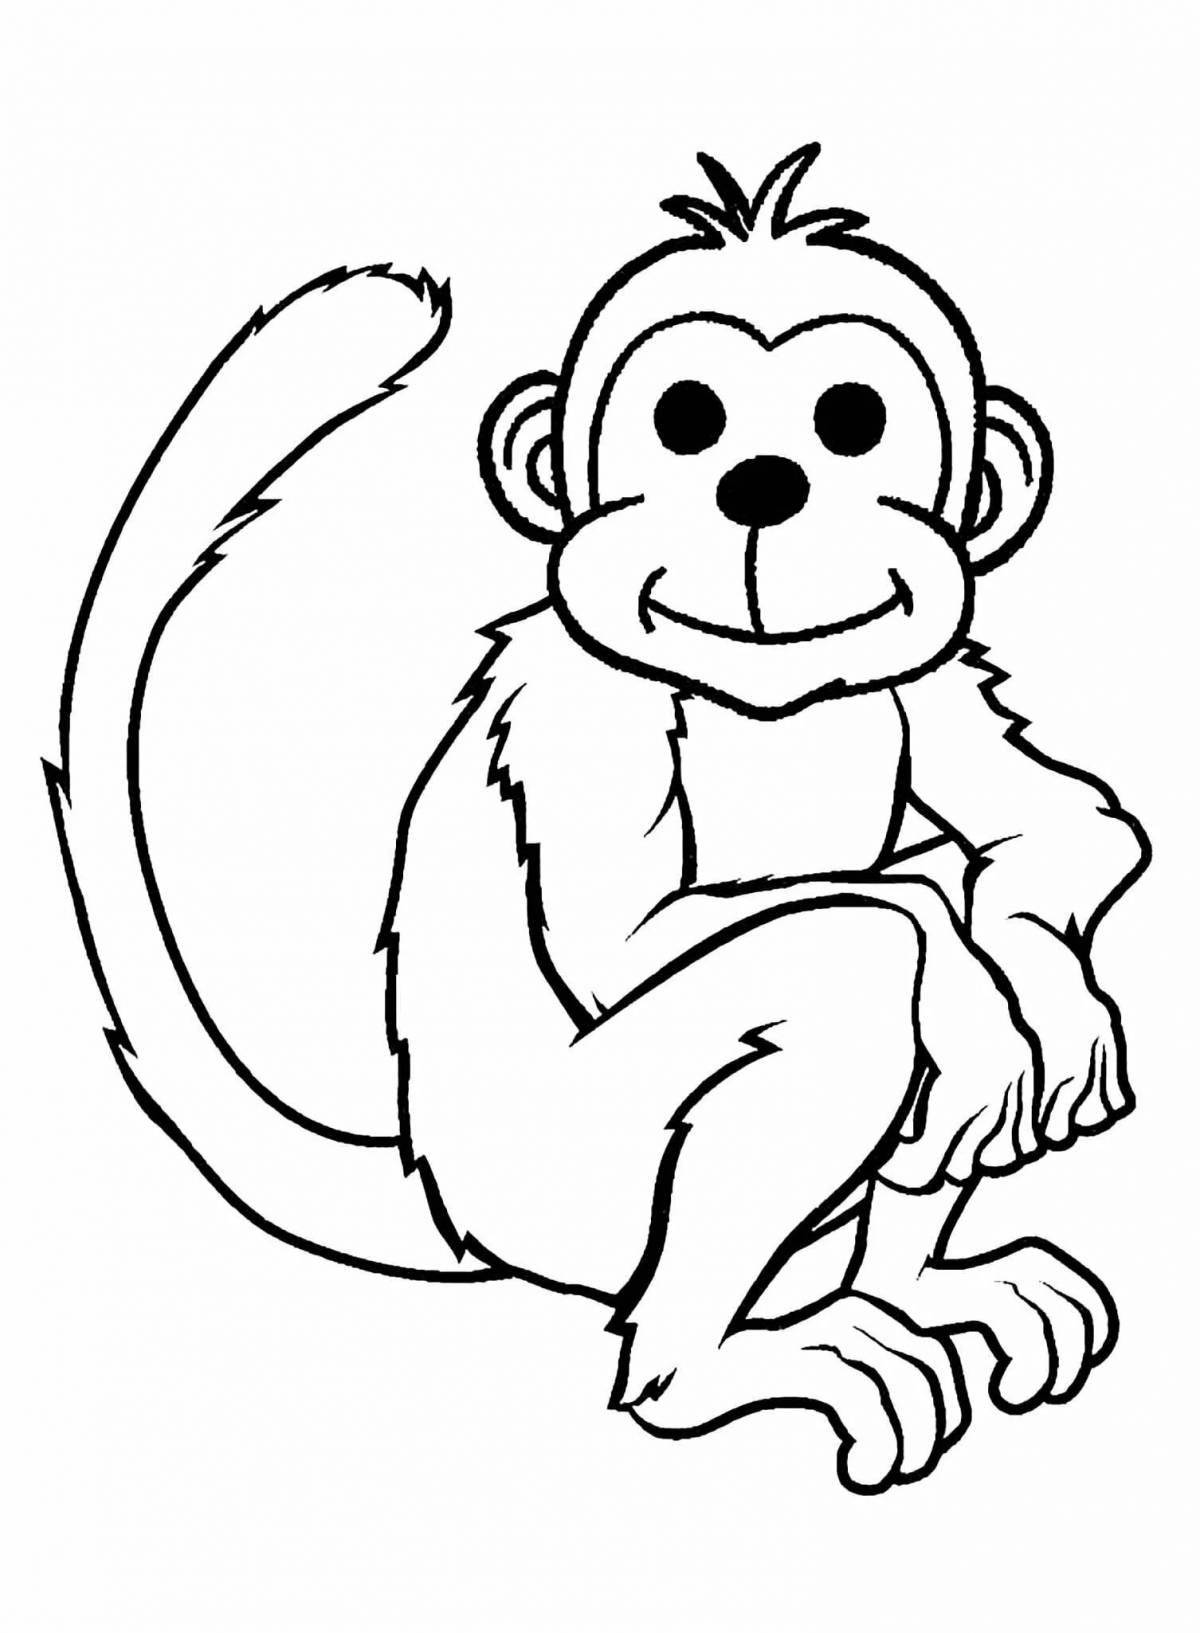 Adorable chimpanzee coloring book for kids